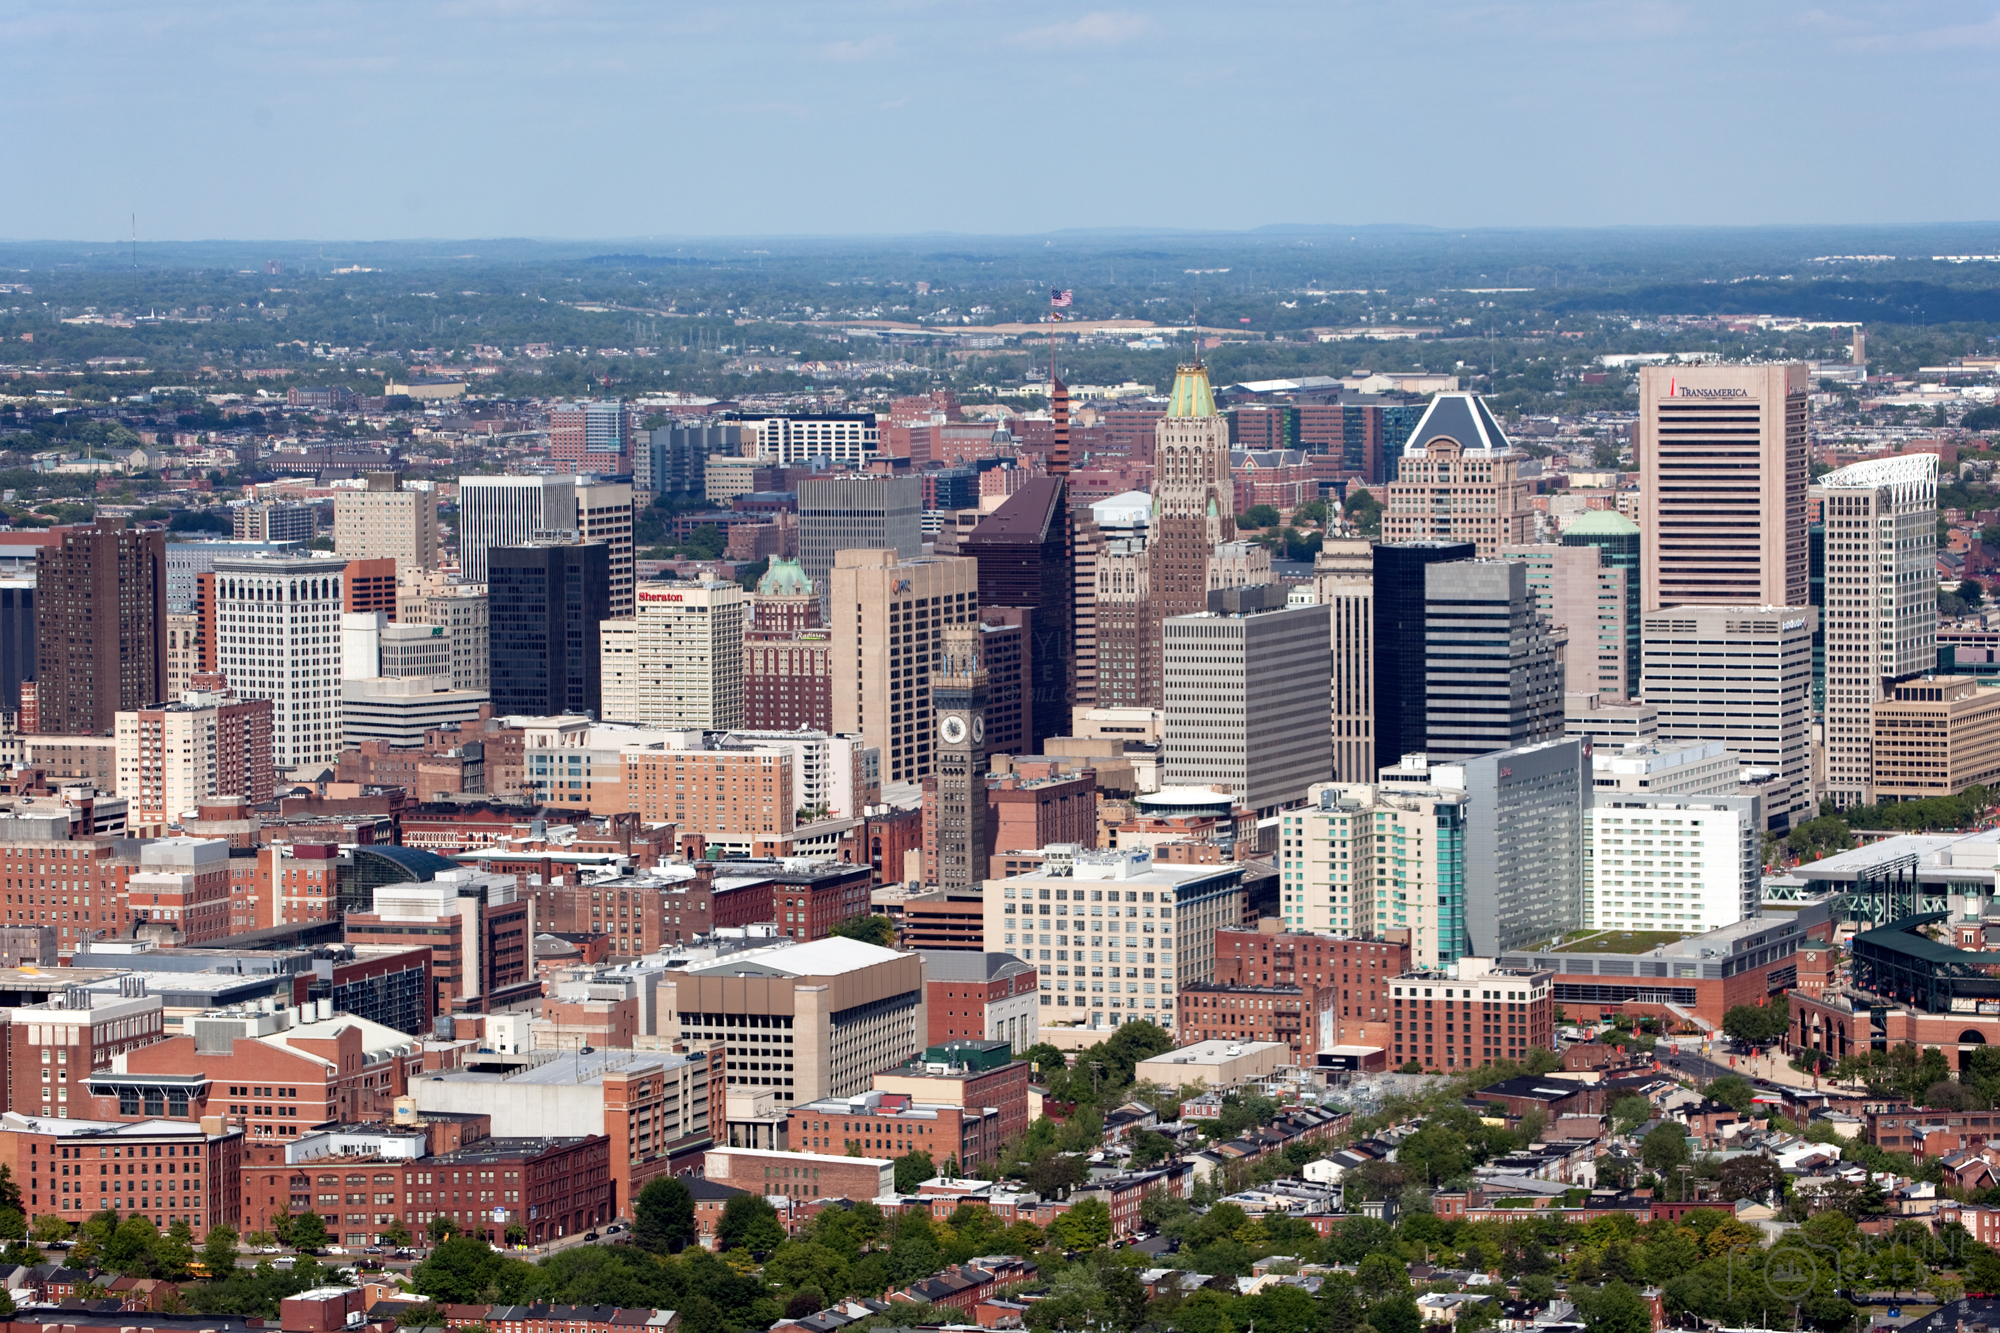 The Downtown Baltimore Skyline